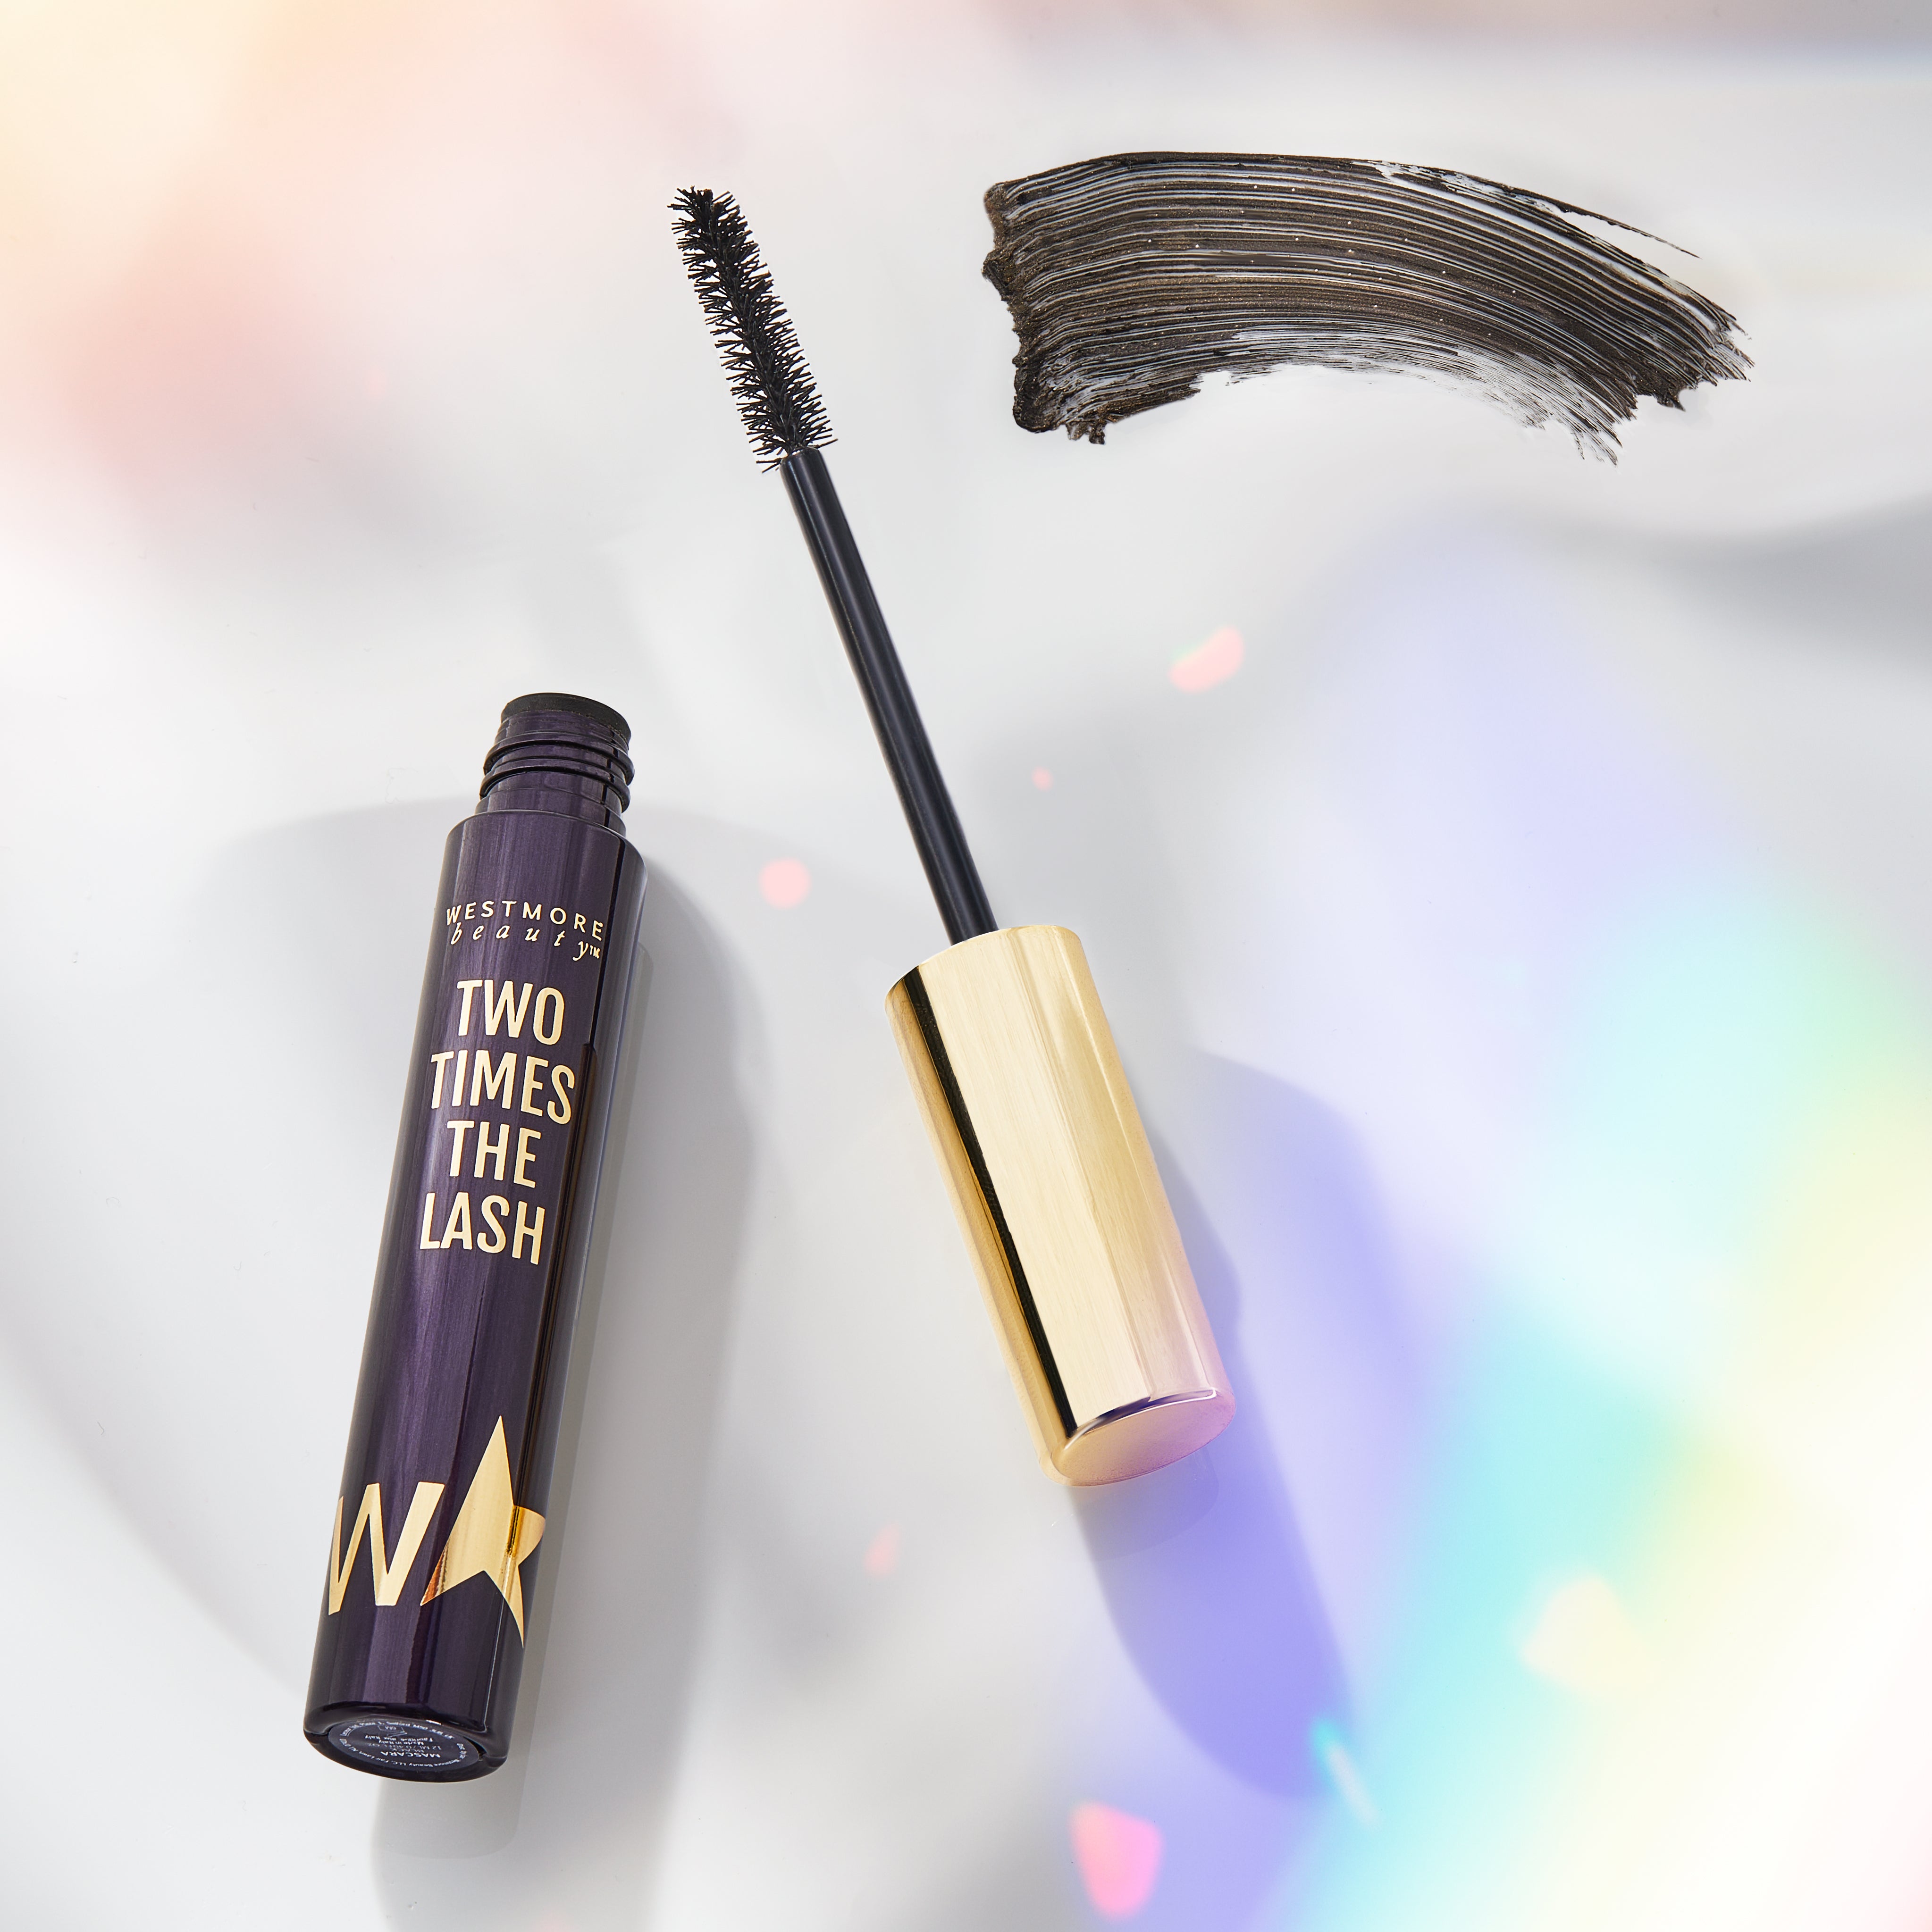 ✨BUY 1 GET 1 FREE✨ Two Times The Lash Dual-Phase Mascara